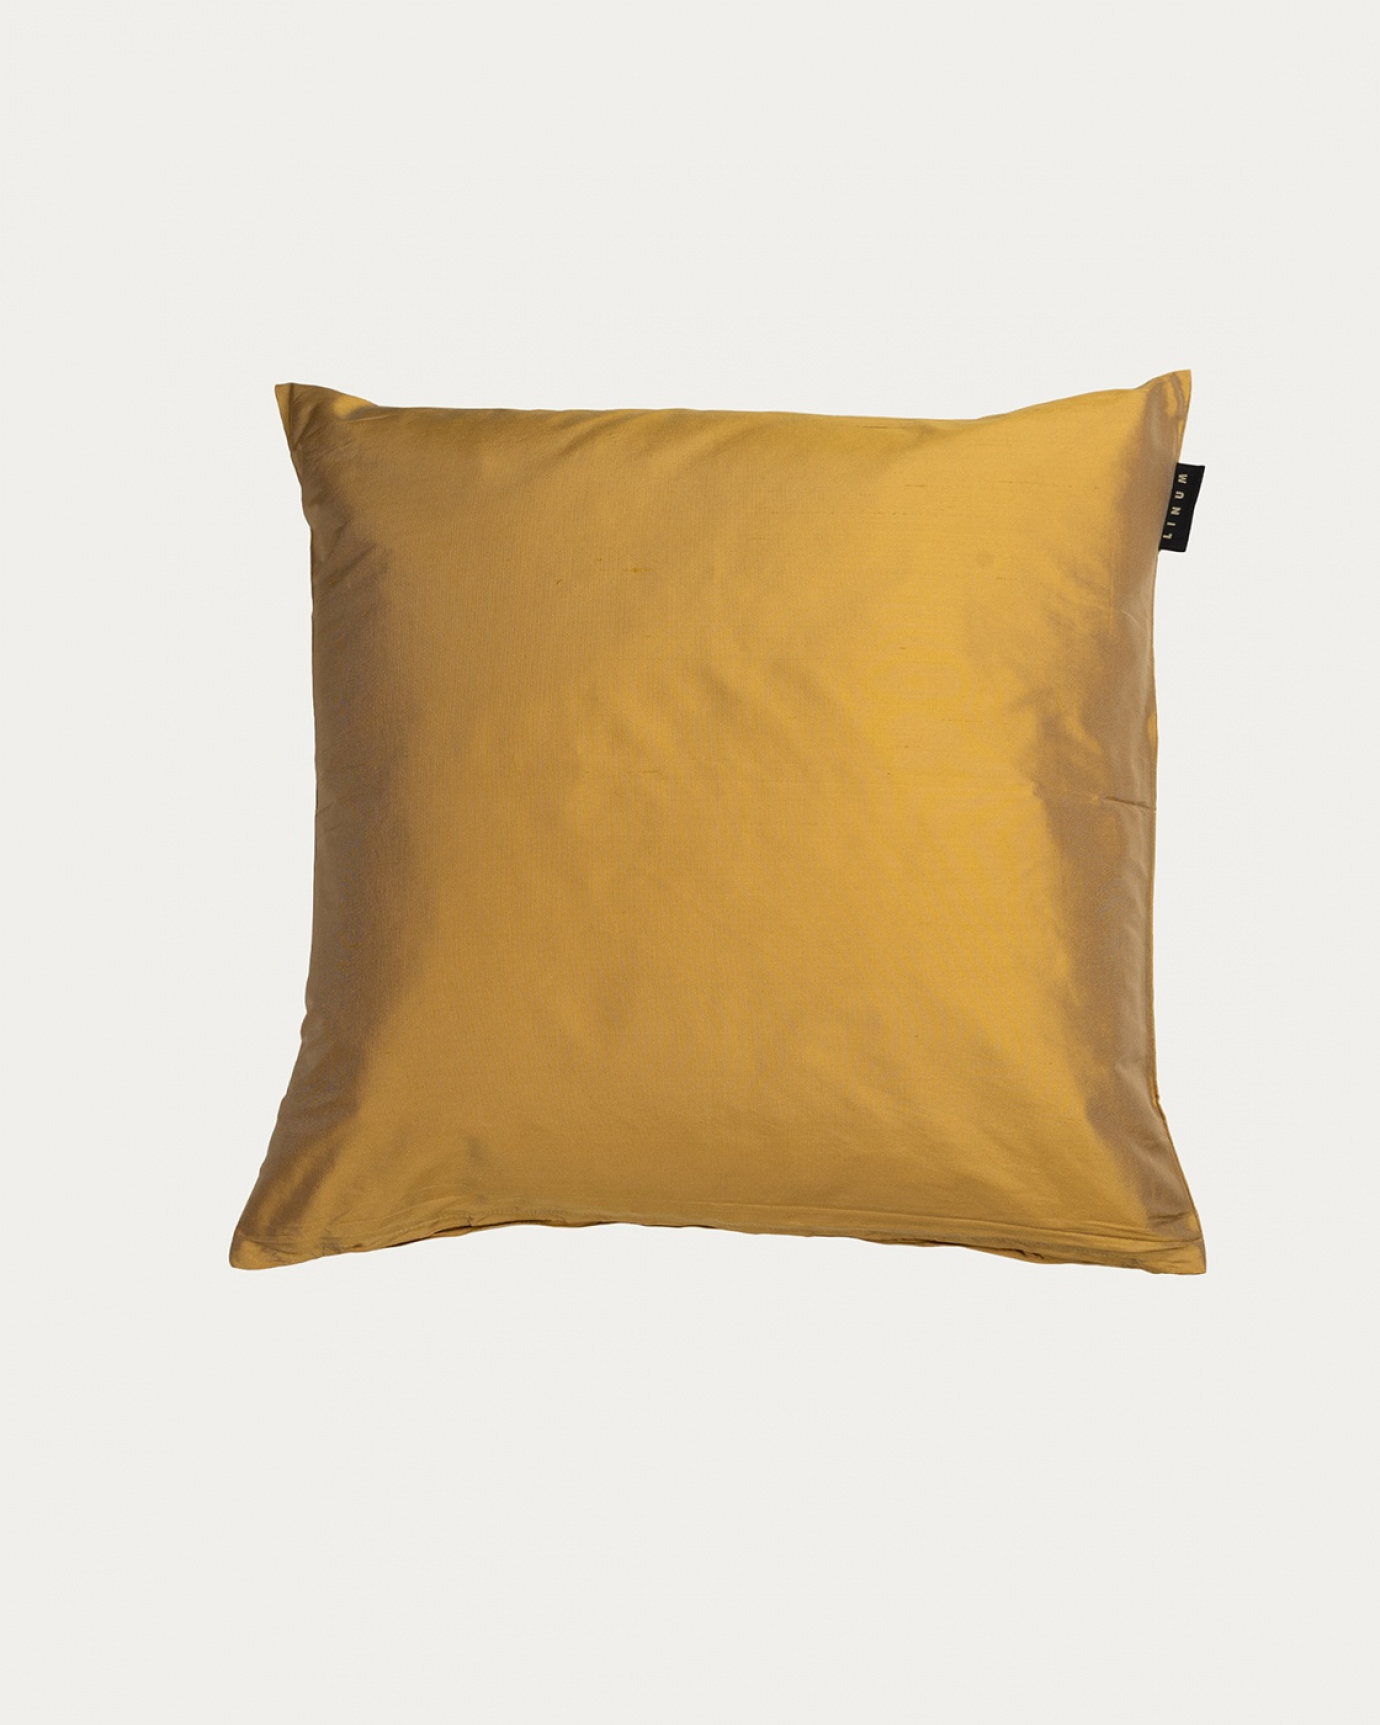 Product image straw yellow SILK cushion cover made of 100% dupion silk that gives a nice lustre from LINUM DESIGN. Size 40x40 cm.